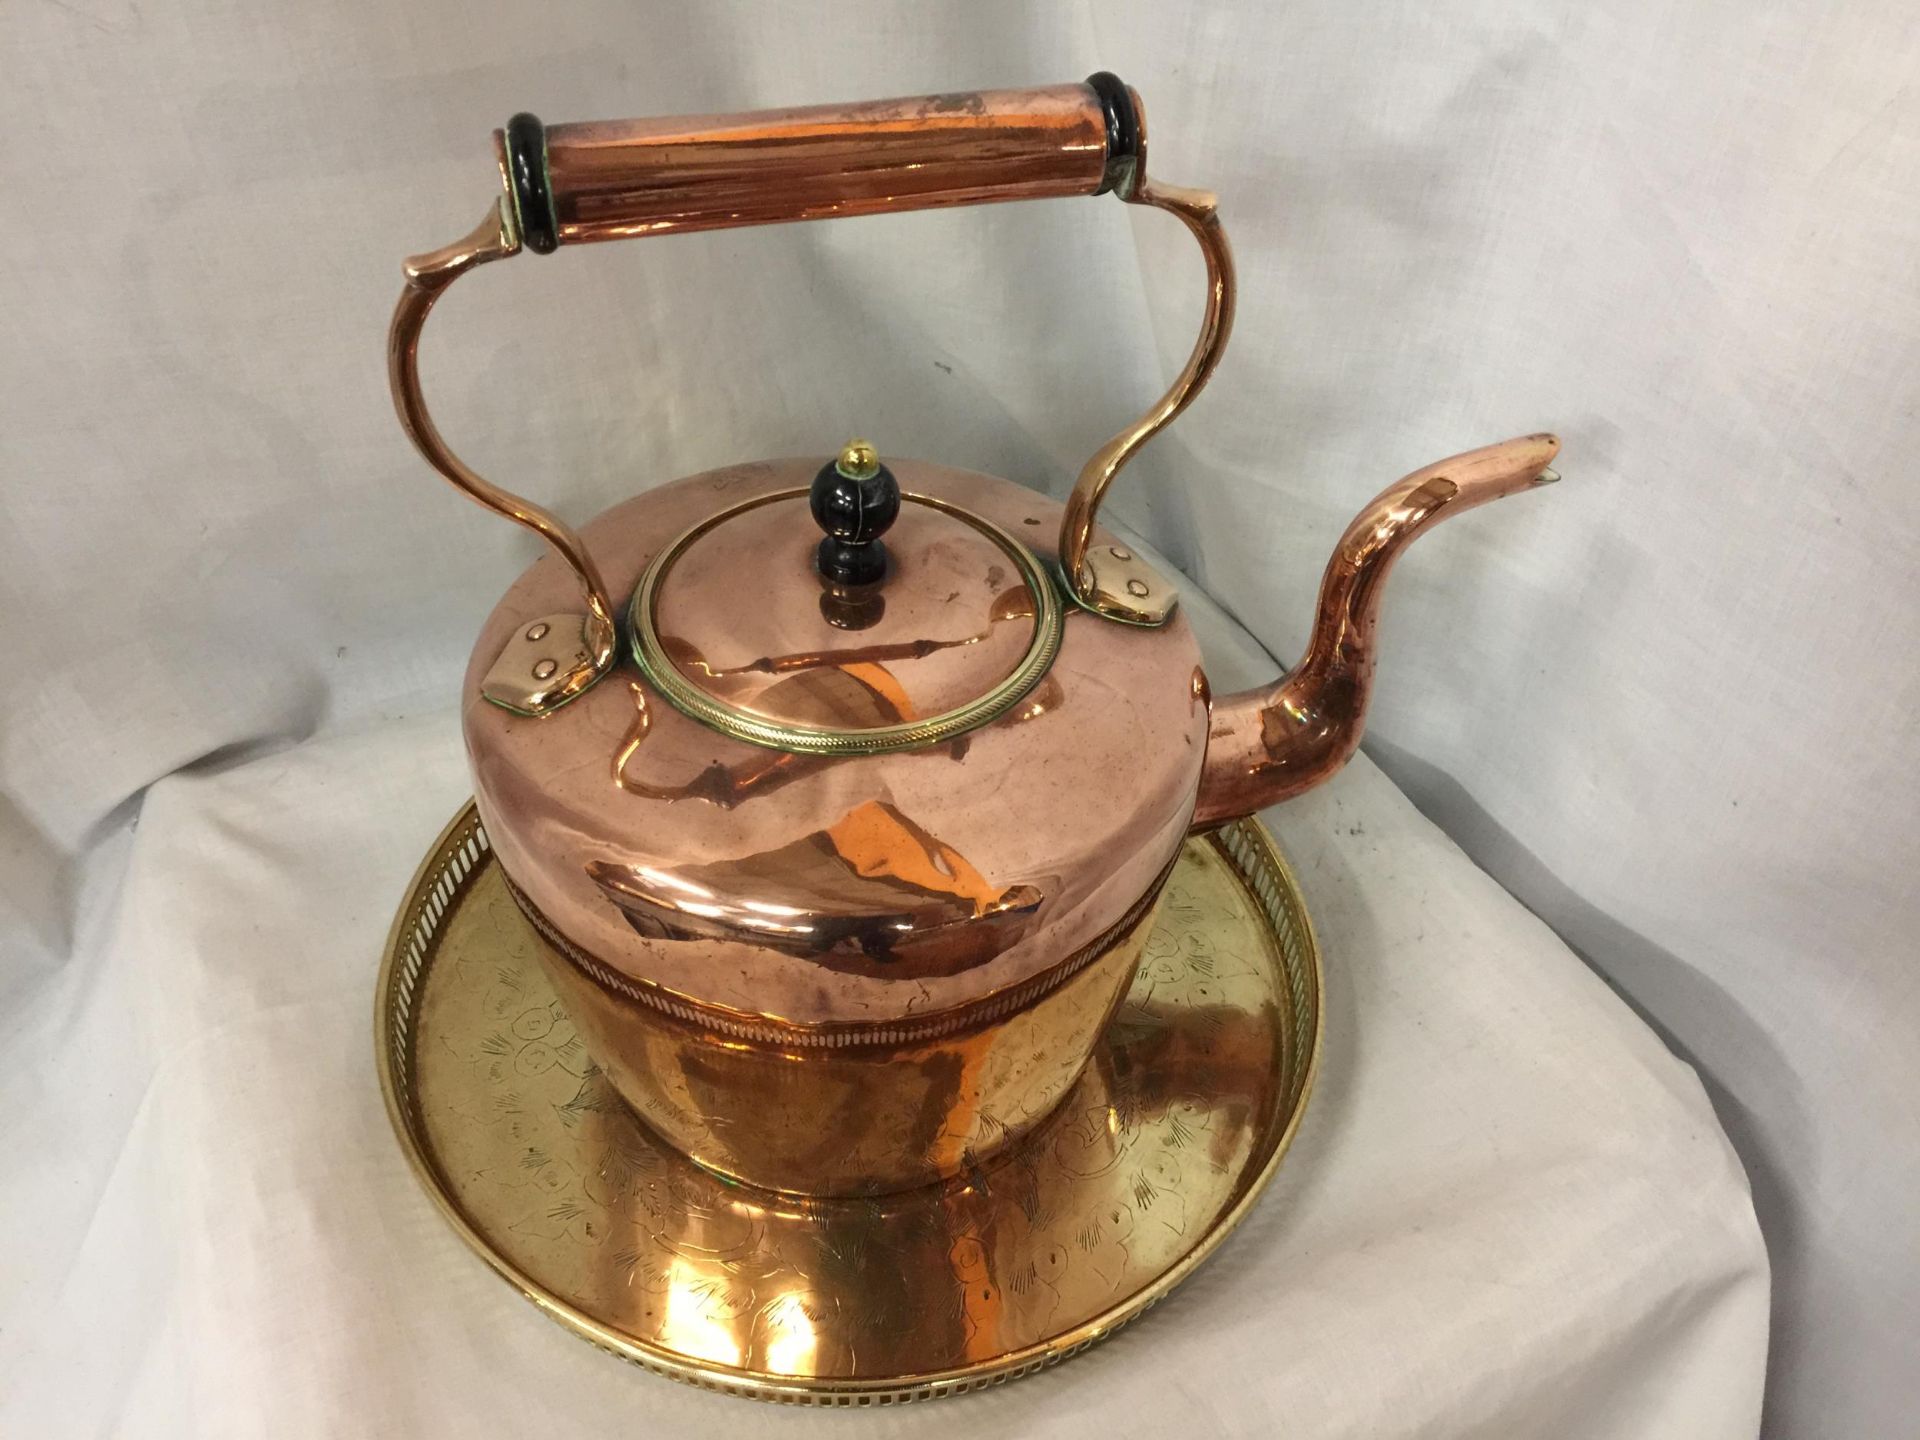 A LARGE COPPER KETTLE, HEIGHT 34CM, WIDTH 34CM TOGETHER WITH BRASS DECORATIVE TRAY DIAMETER 33CM - Image 3 of 3